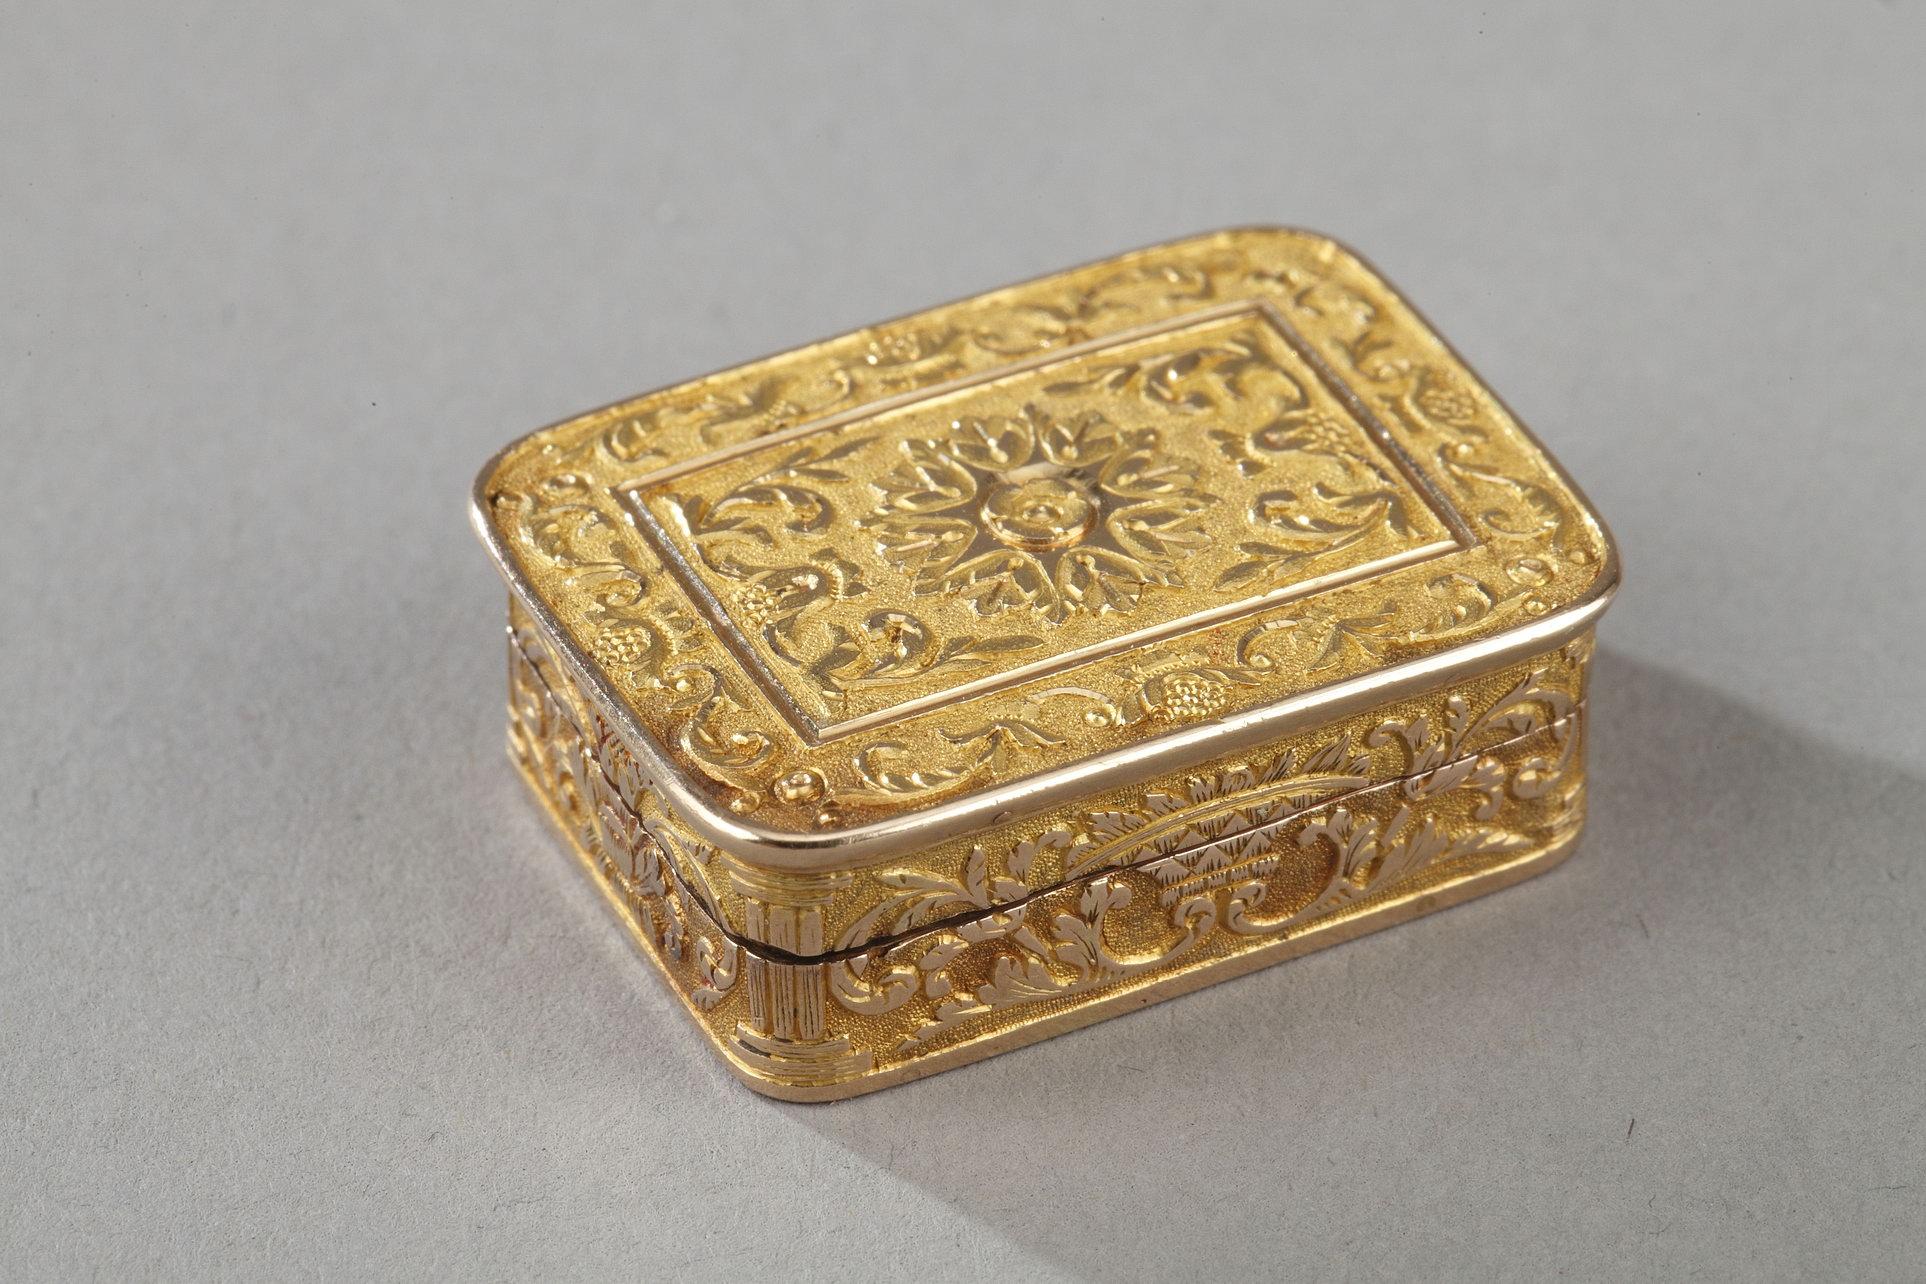 Rectangular, gold vinaigrette with a hinged lid is organized around a central pattern of stylized flower. A geometric frieze frames the composition. The bate is decorated with friezes of foliage on amati background. The background is guilloche